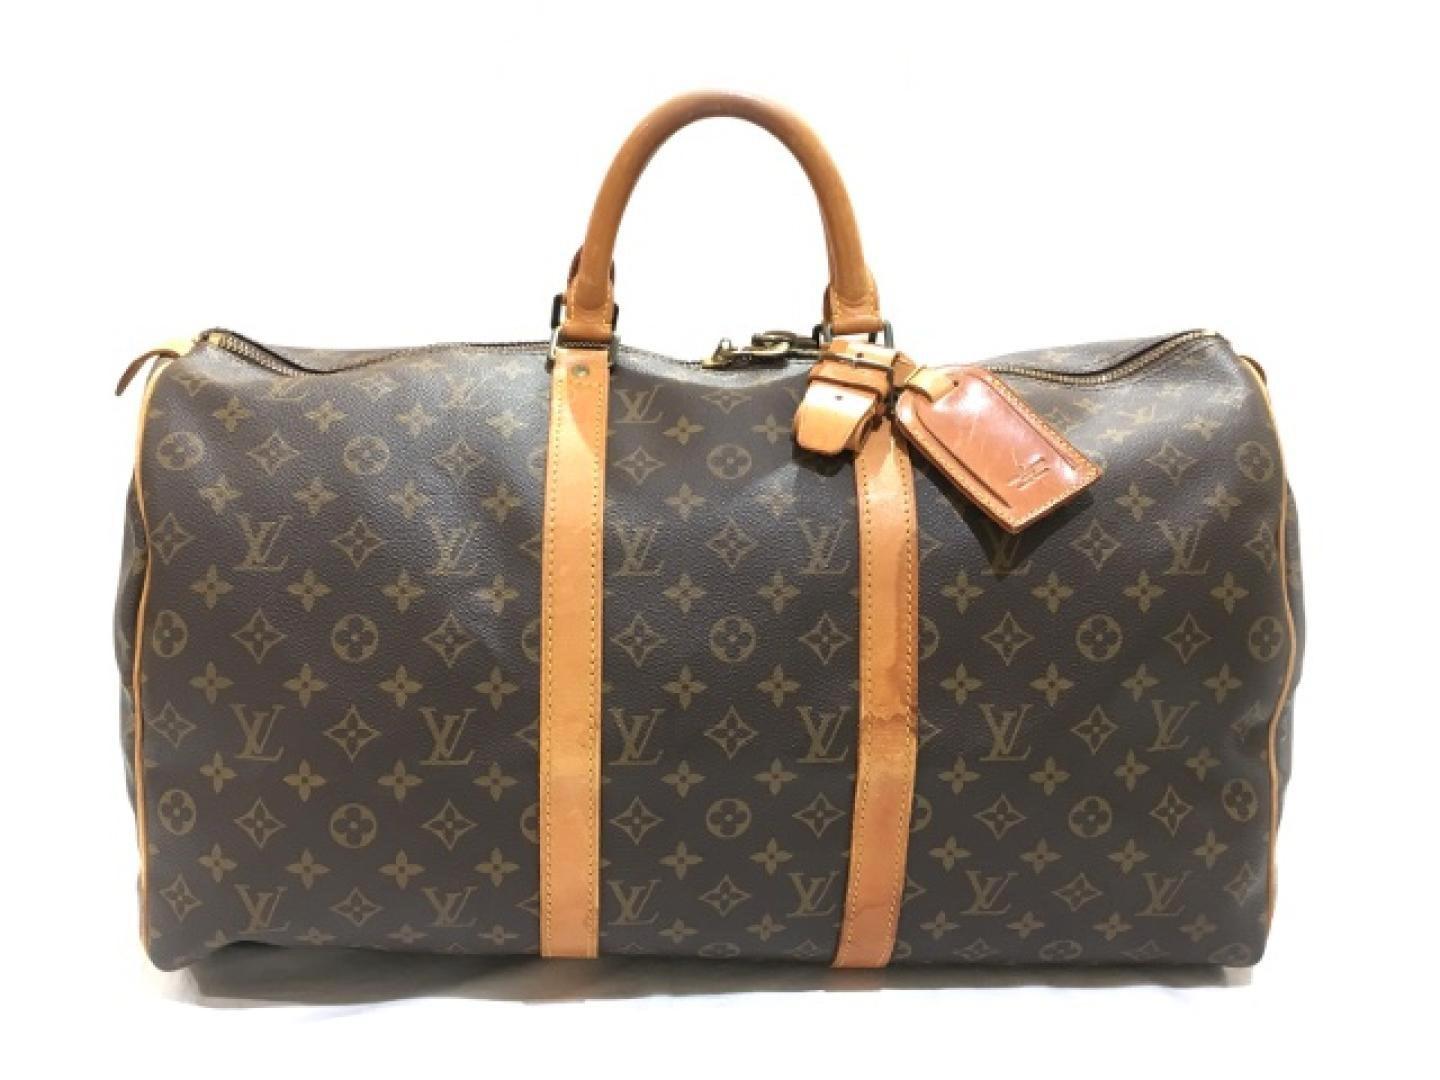 Lyst - Louis Vuitton Authentic Keepall 50 Boston Bag M41426 Monogram Used Vintage in Brown for Men